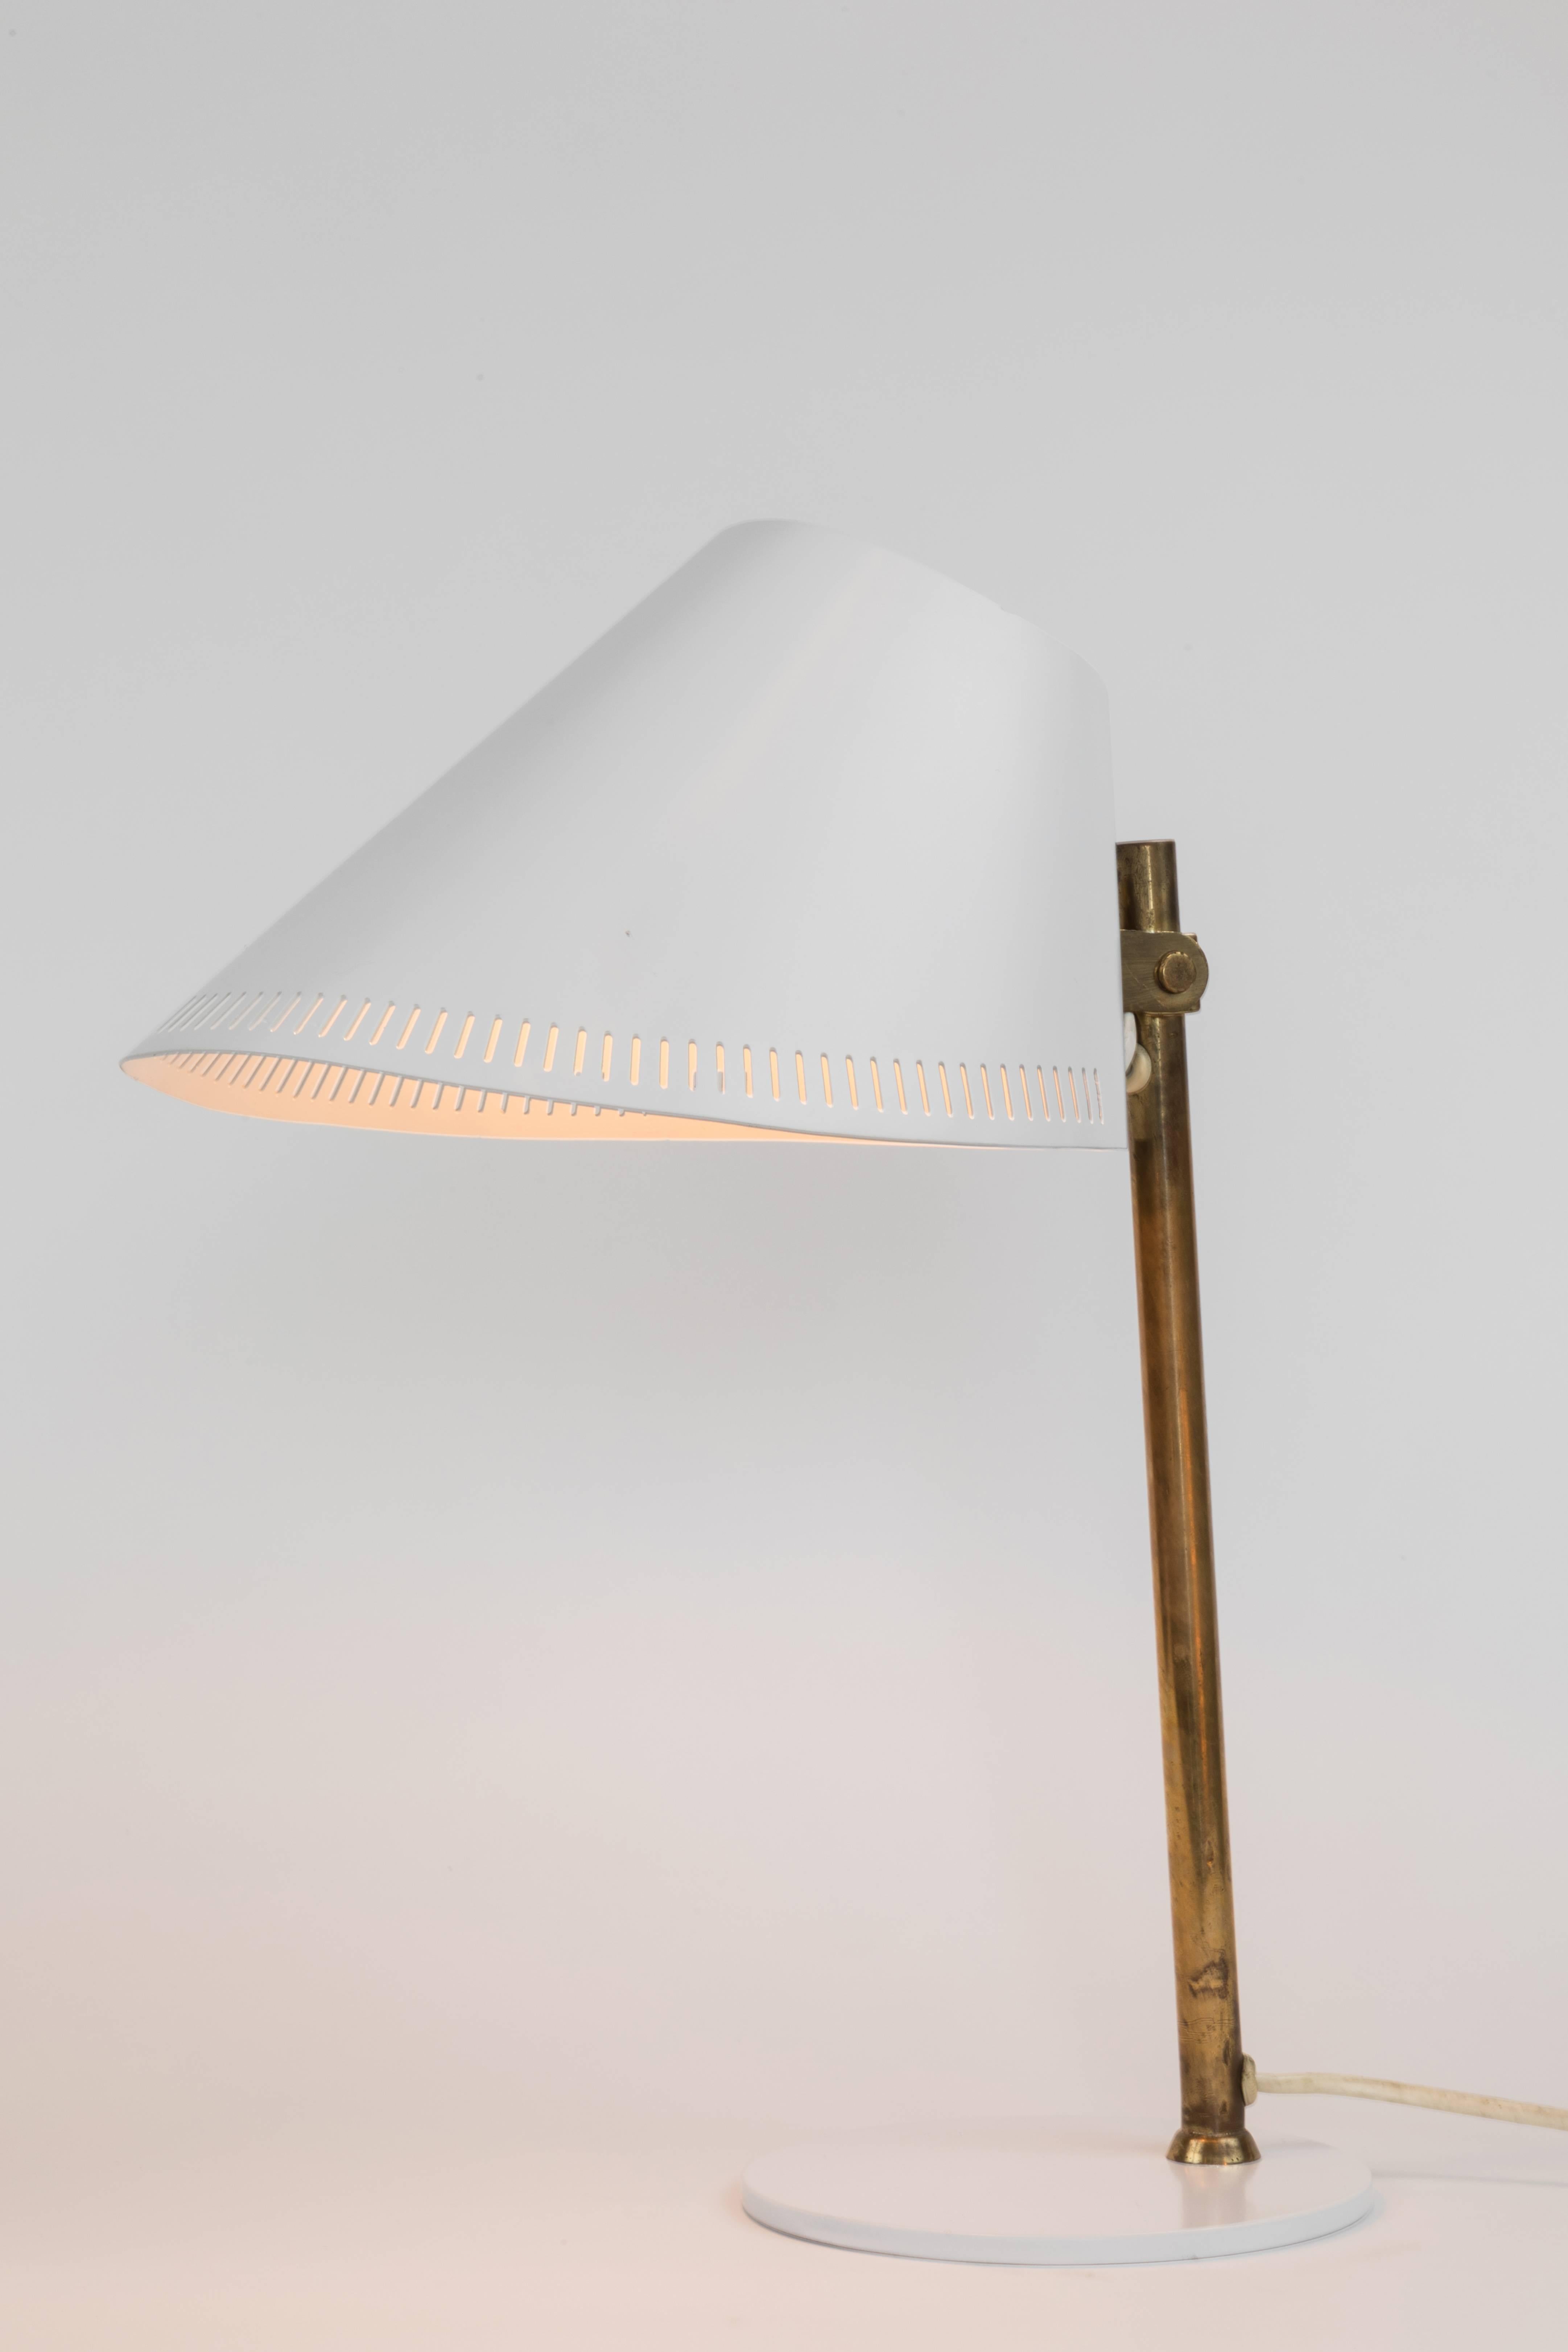 1950s Paavo Tynell 9227 table lamp for Idman. An increasingly rare design from a highly collectible Finnish design icon executed in brass and white aluminum and metal. Retain original Idman manufacturer's stamp.

Not UL listed, but recommended UL